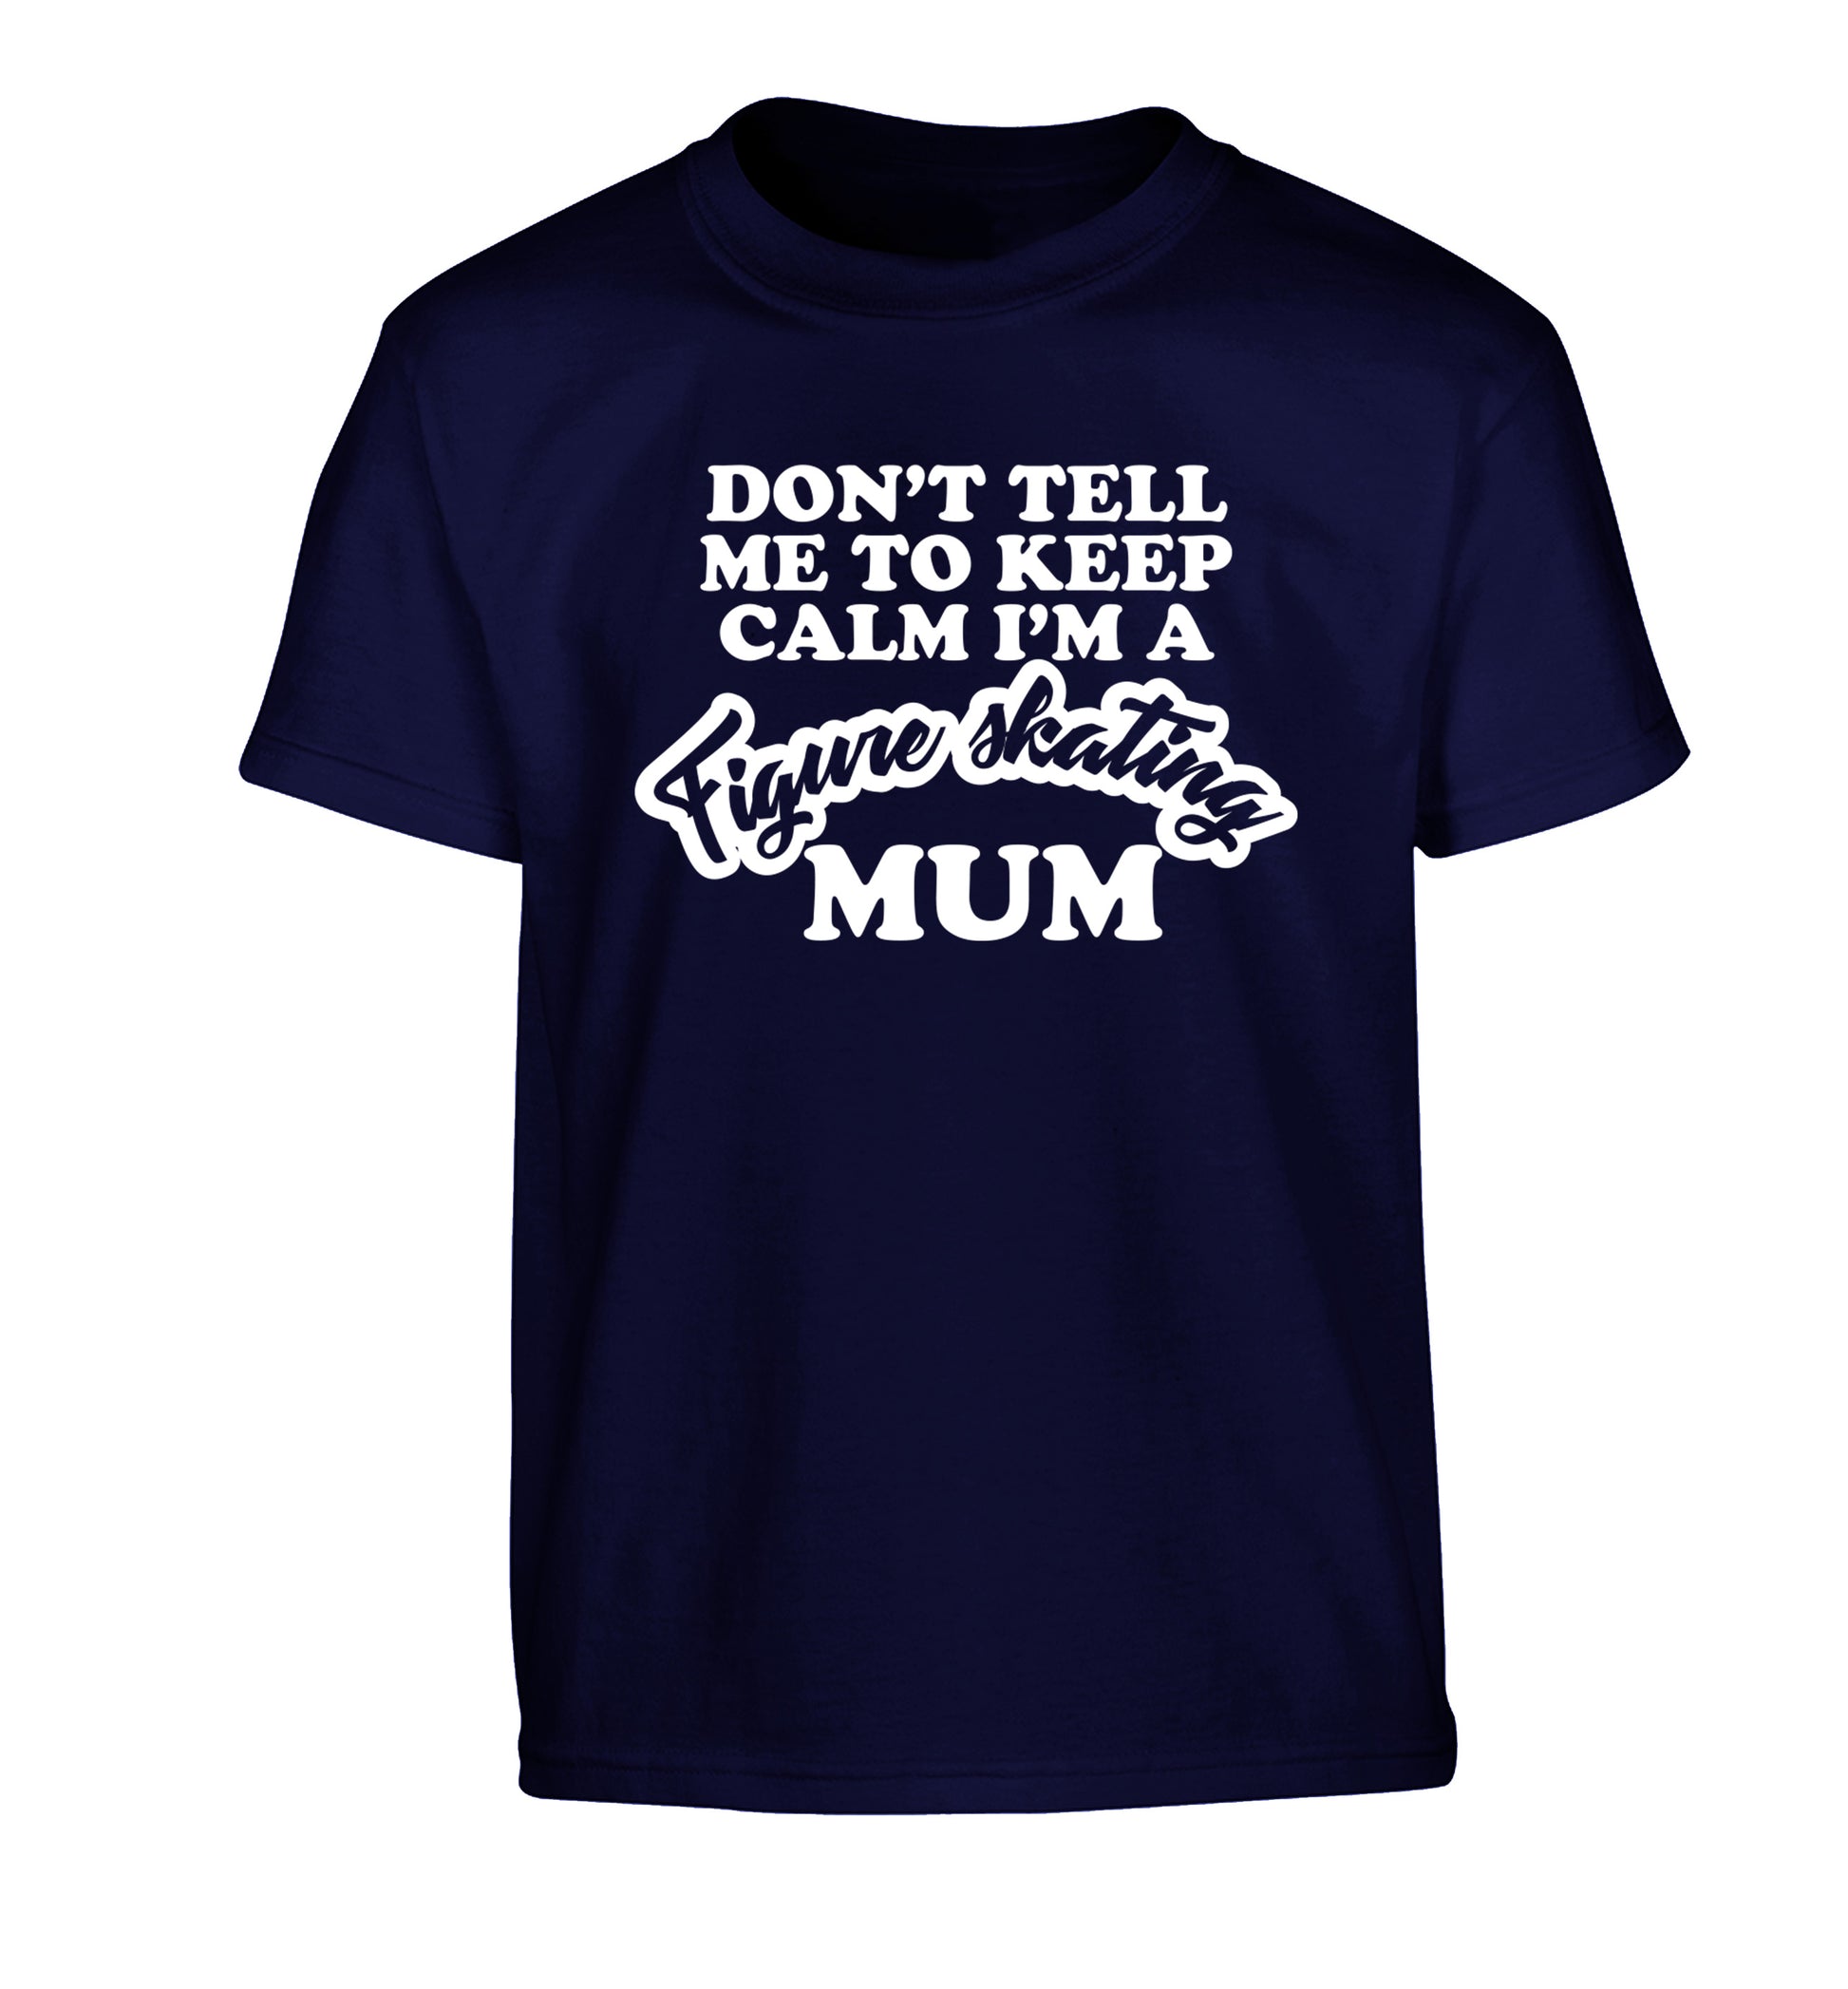 Don't tell me to keep calm I'm a figure skating mum Children's navy Tshirt 12-14 Years